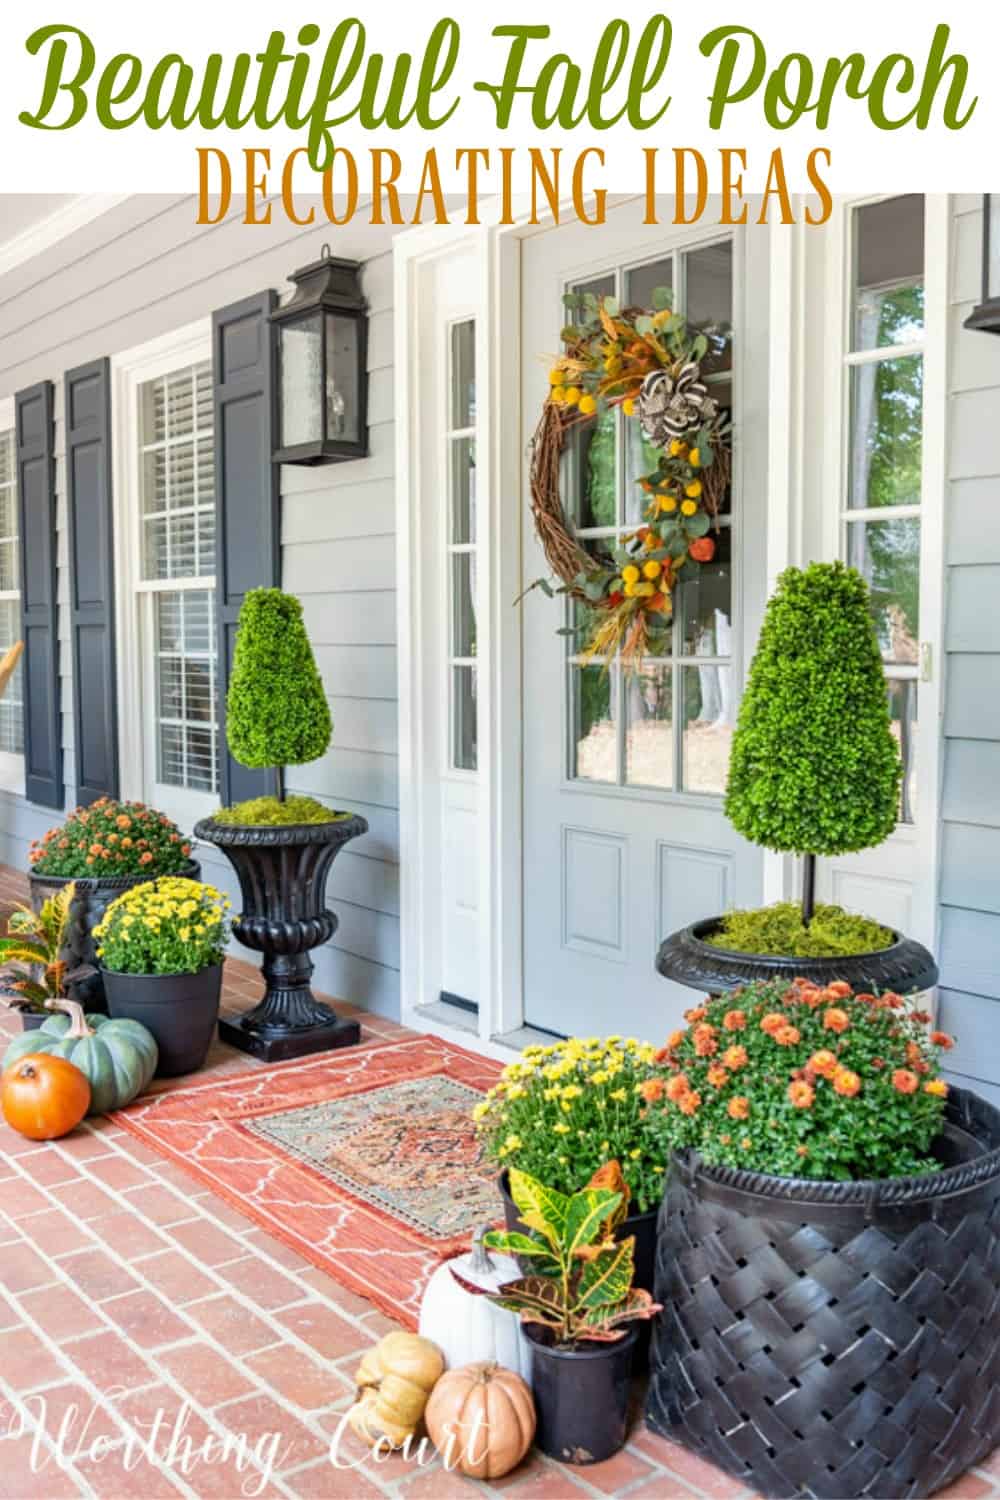 Inspiring Front Porch Decor Ideas For Fall Worthing Court